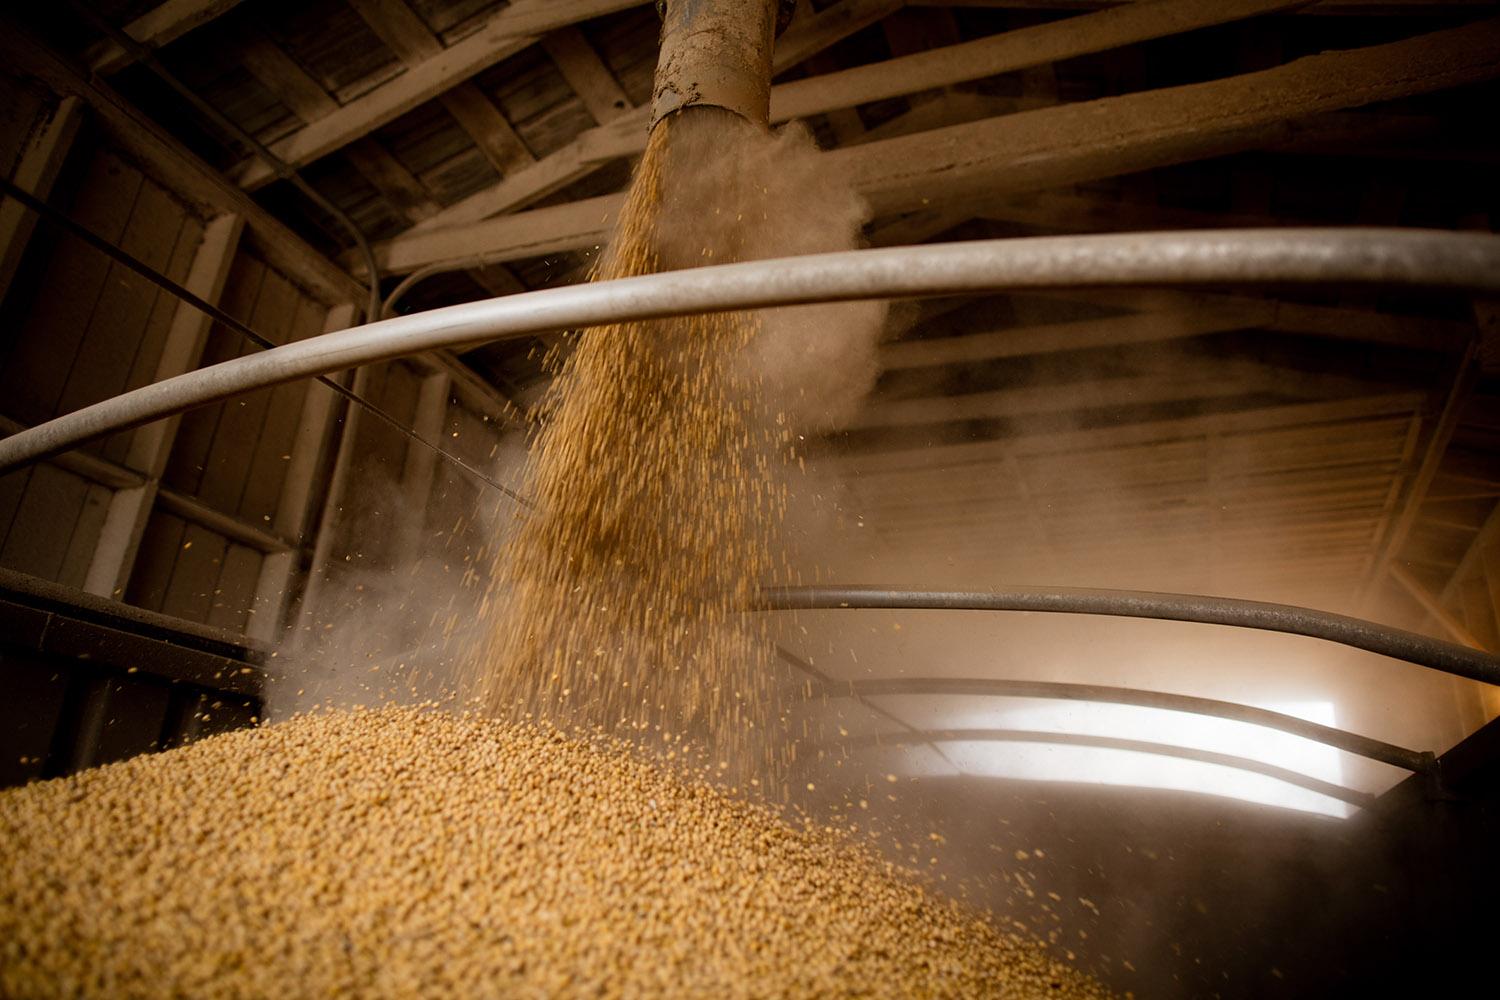 Soybeans being unloaded in grain wagon